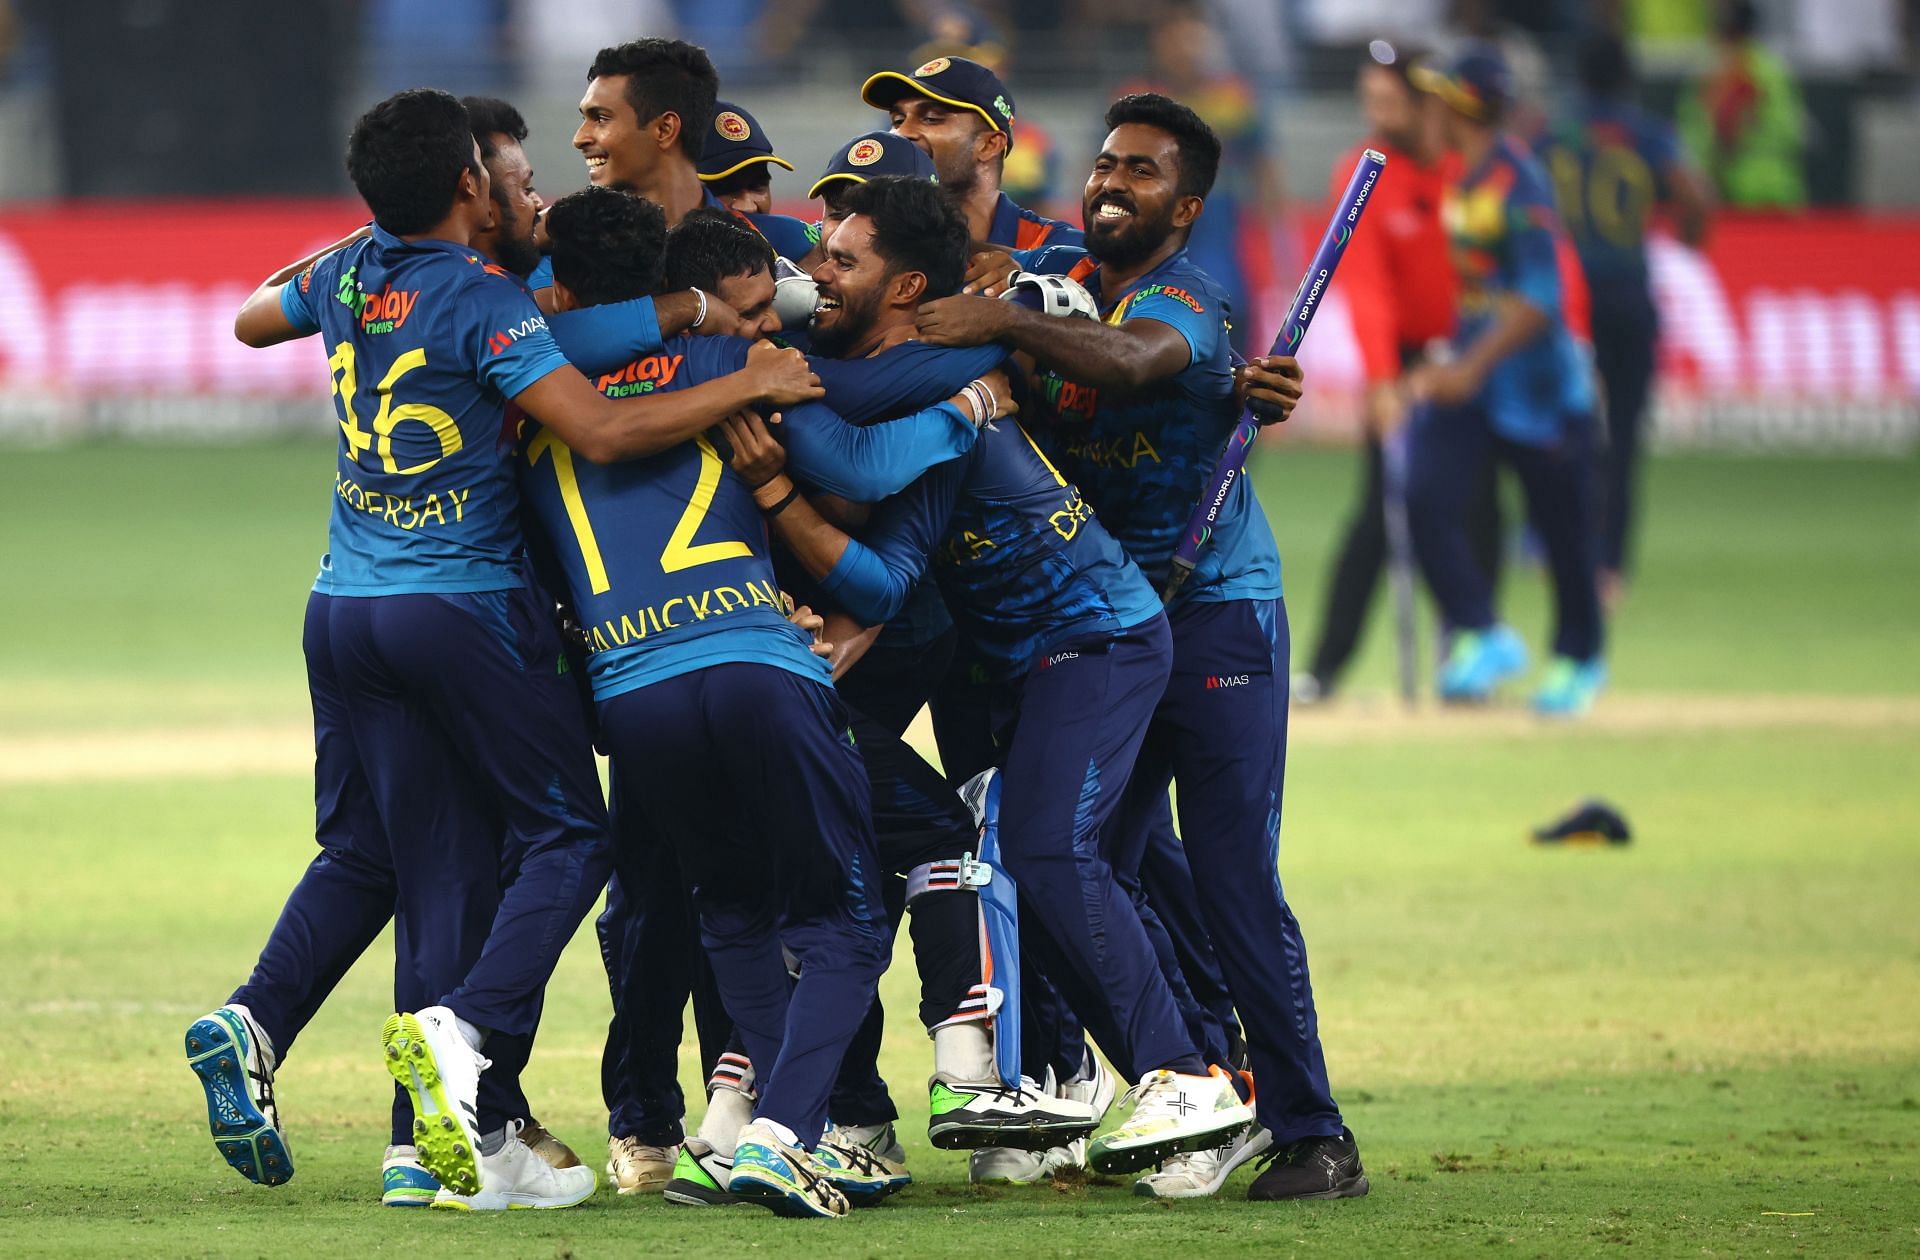 Sri Lanka topped qualifying Group A and joined Group 1 for the Super 12 stage.